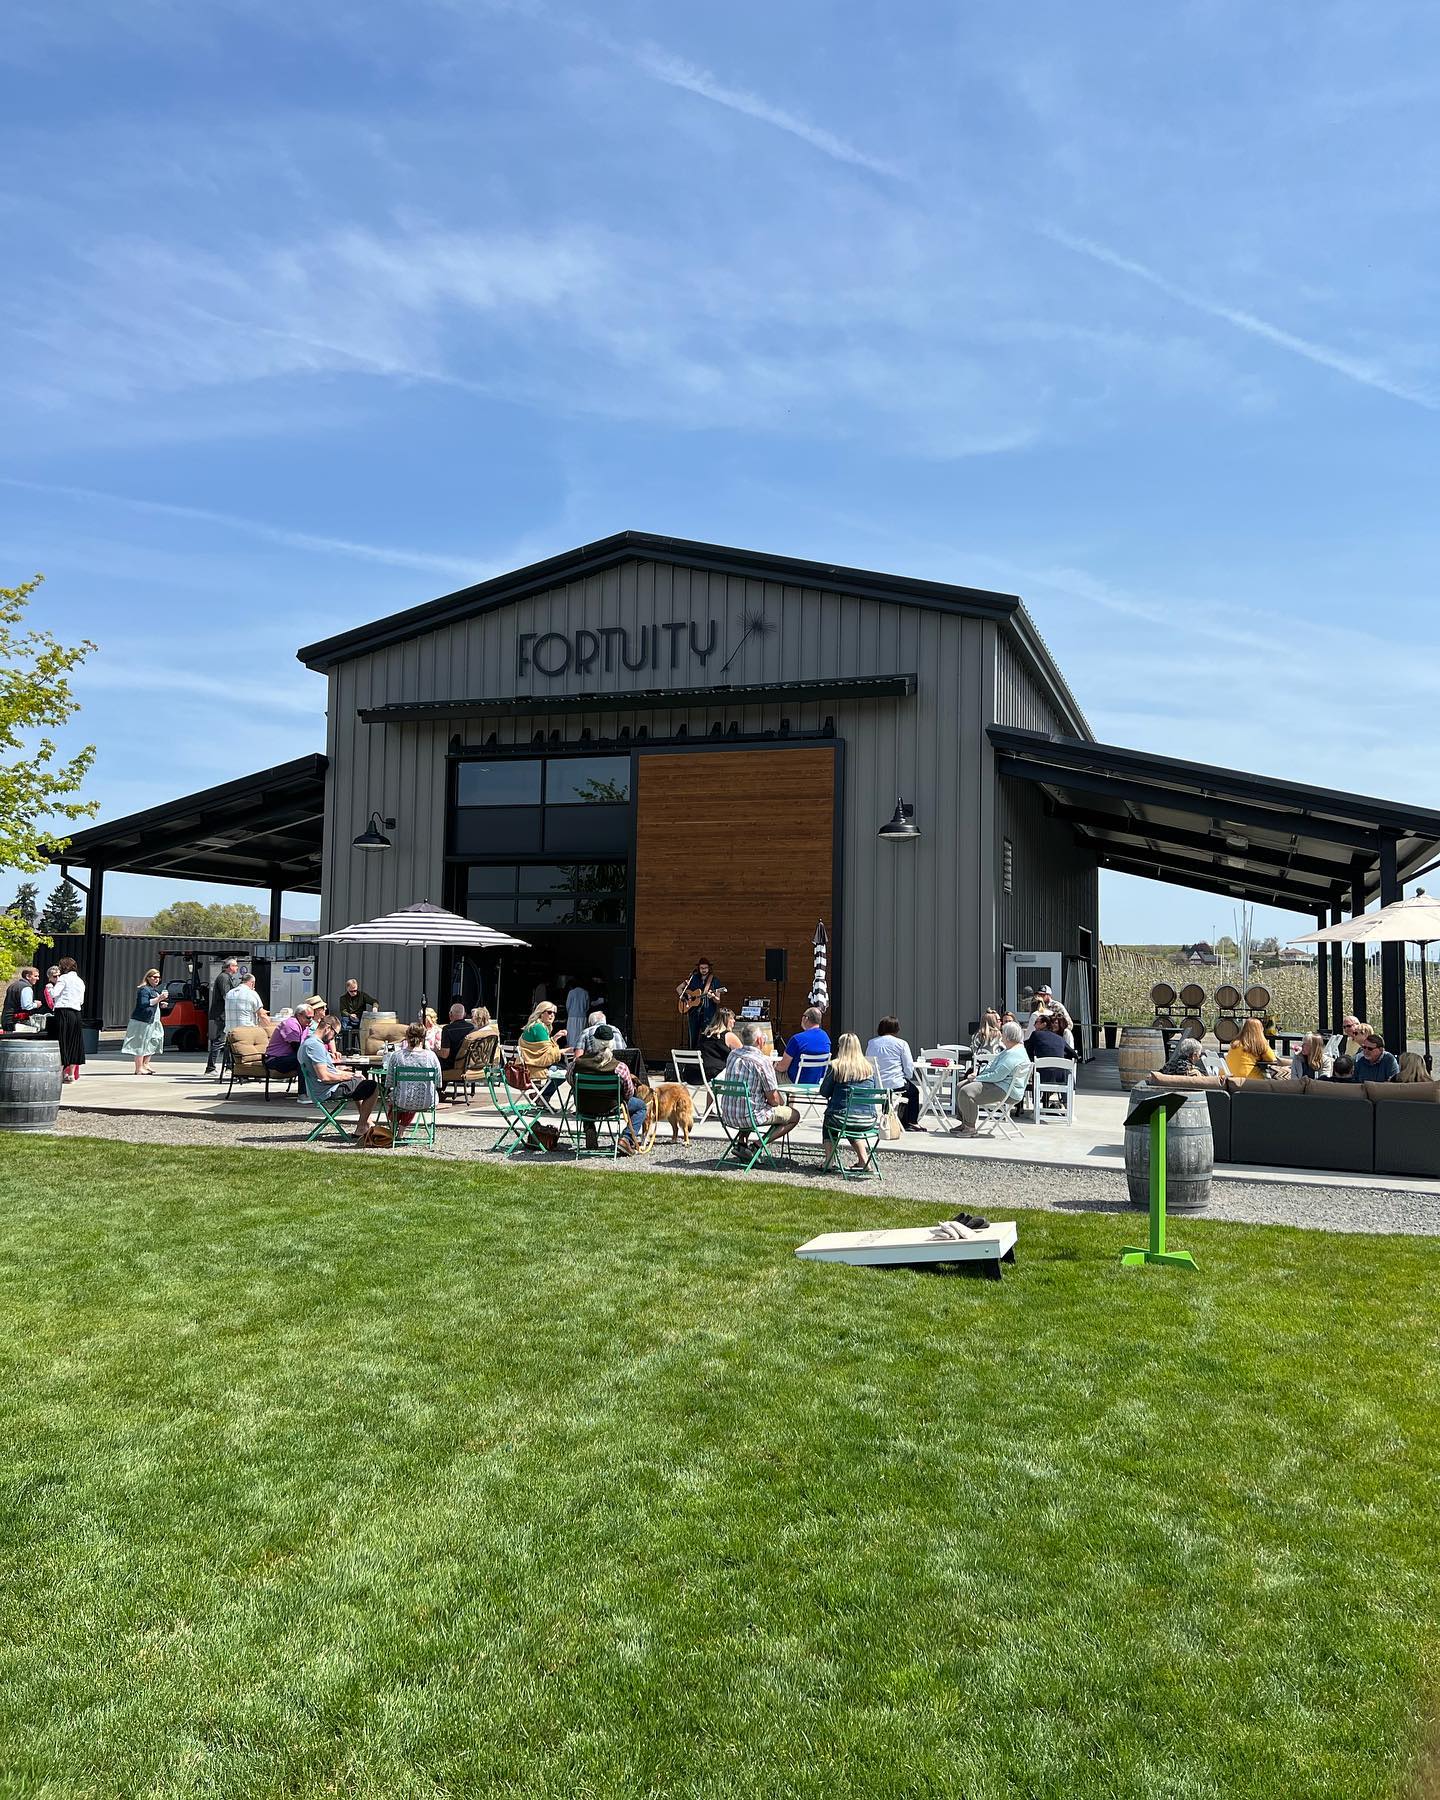 The outside of Fortuity Cellars